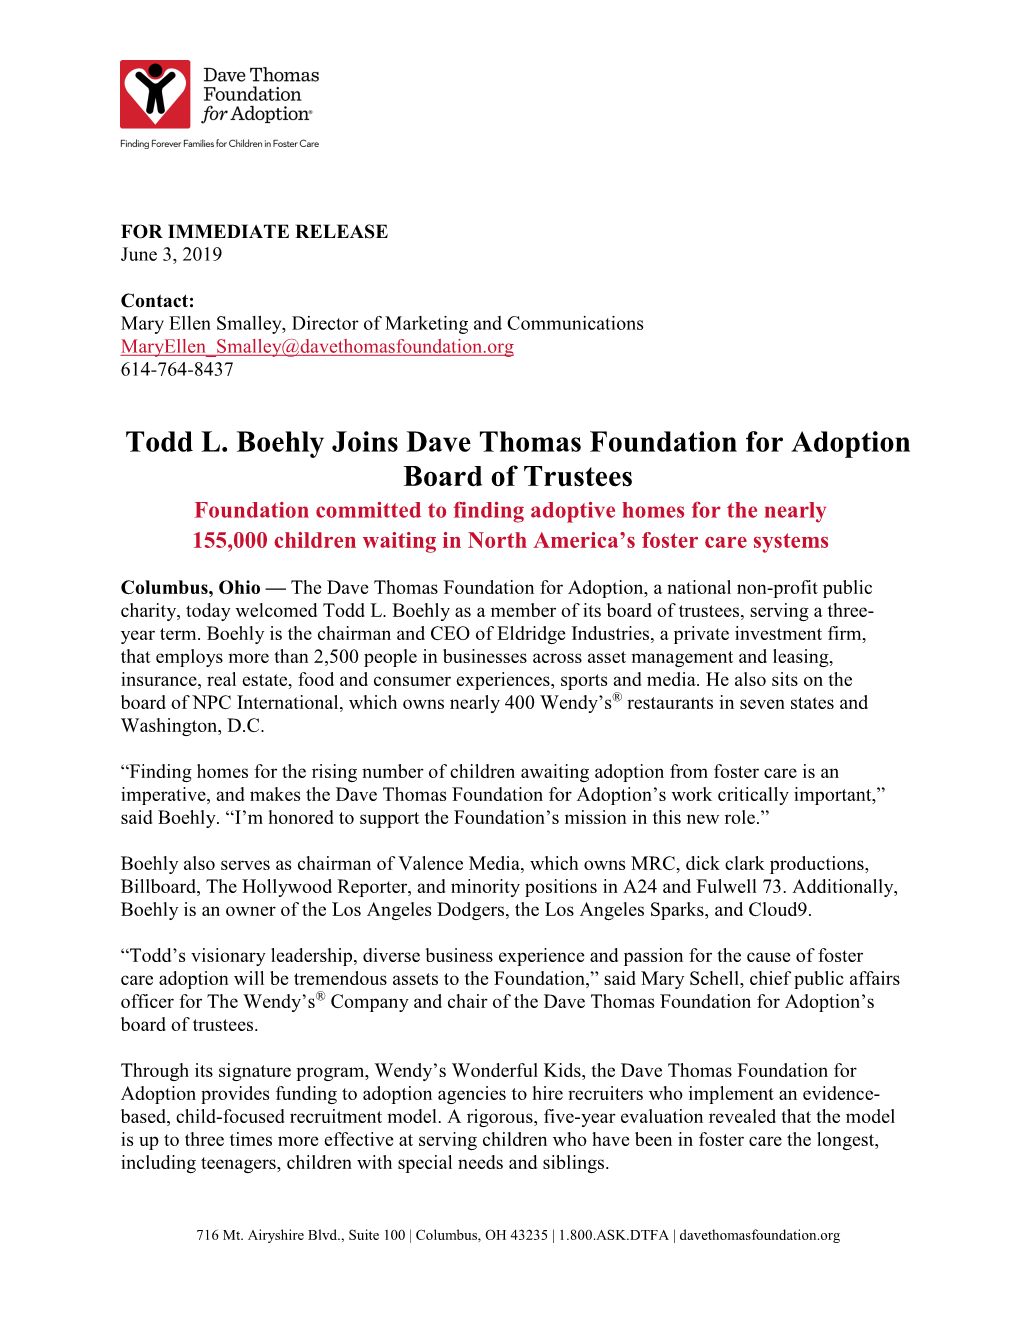 Todd L. Boehly Joins Dave Thomas Foundation for Adoption Board Of